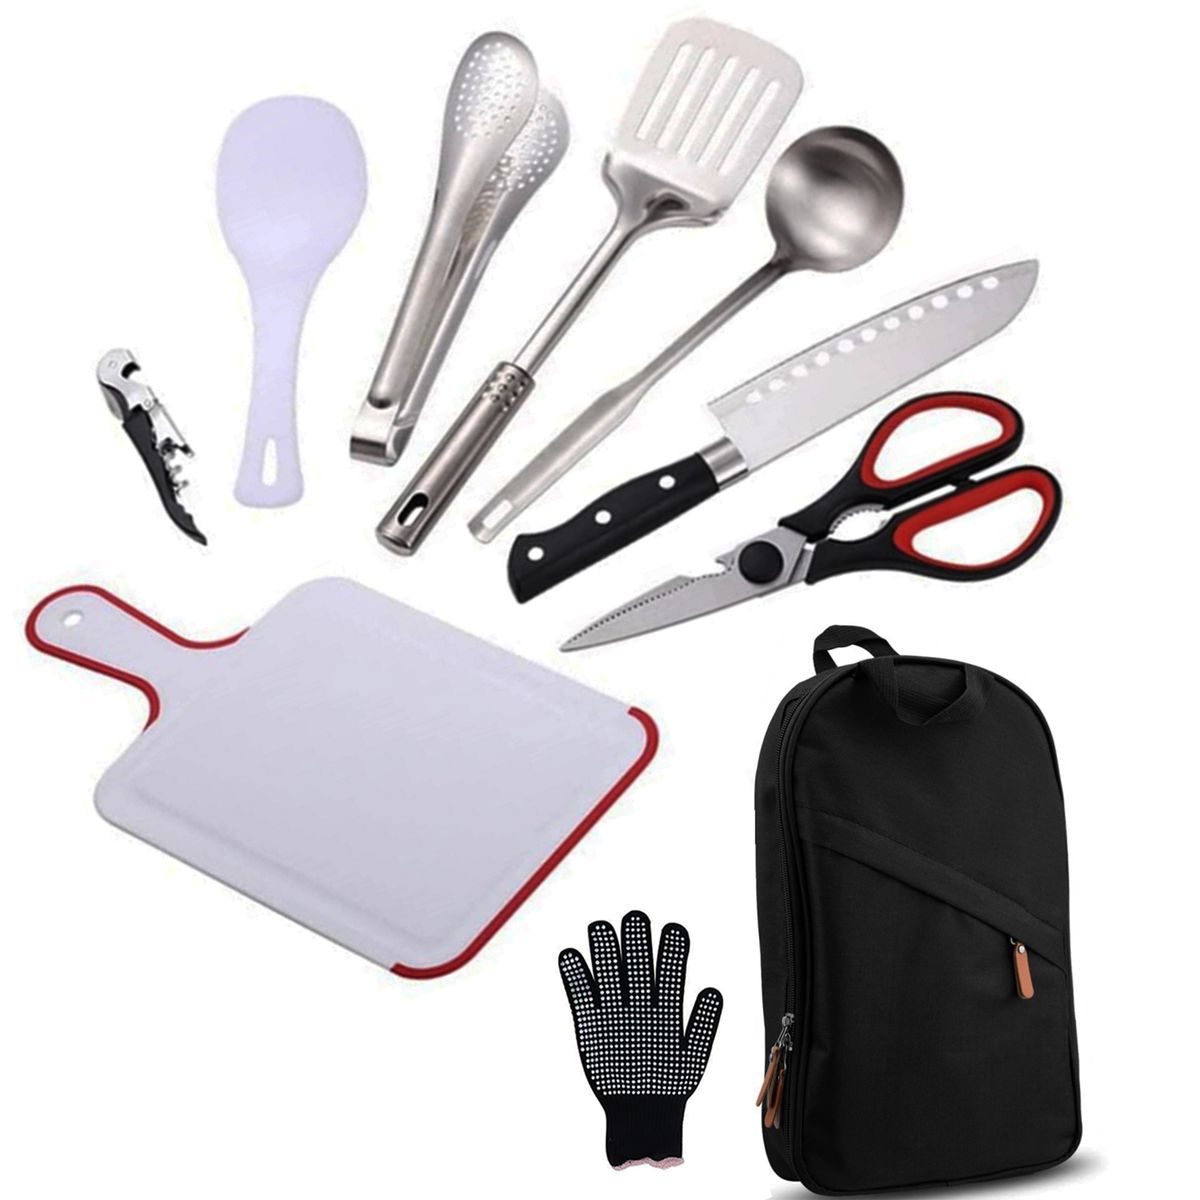 11 Piece Camping Kitchen Utensil Set | Shop Today. Get it Tomorrow ...